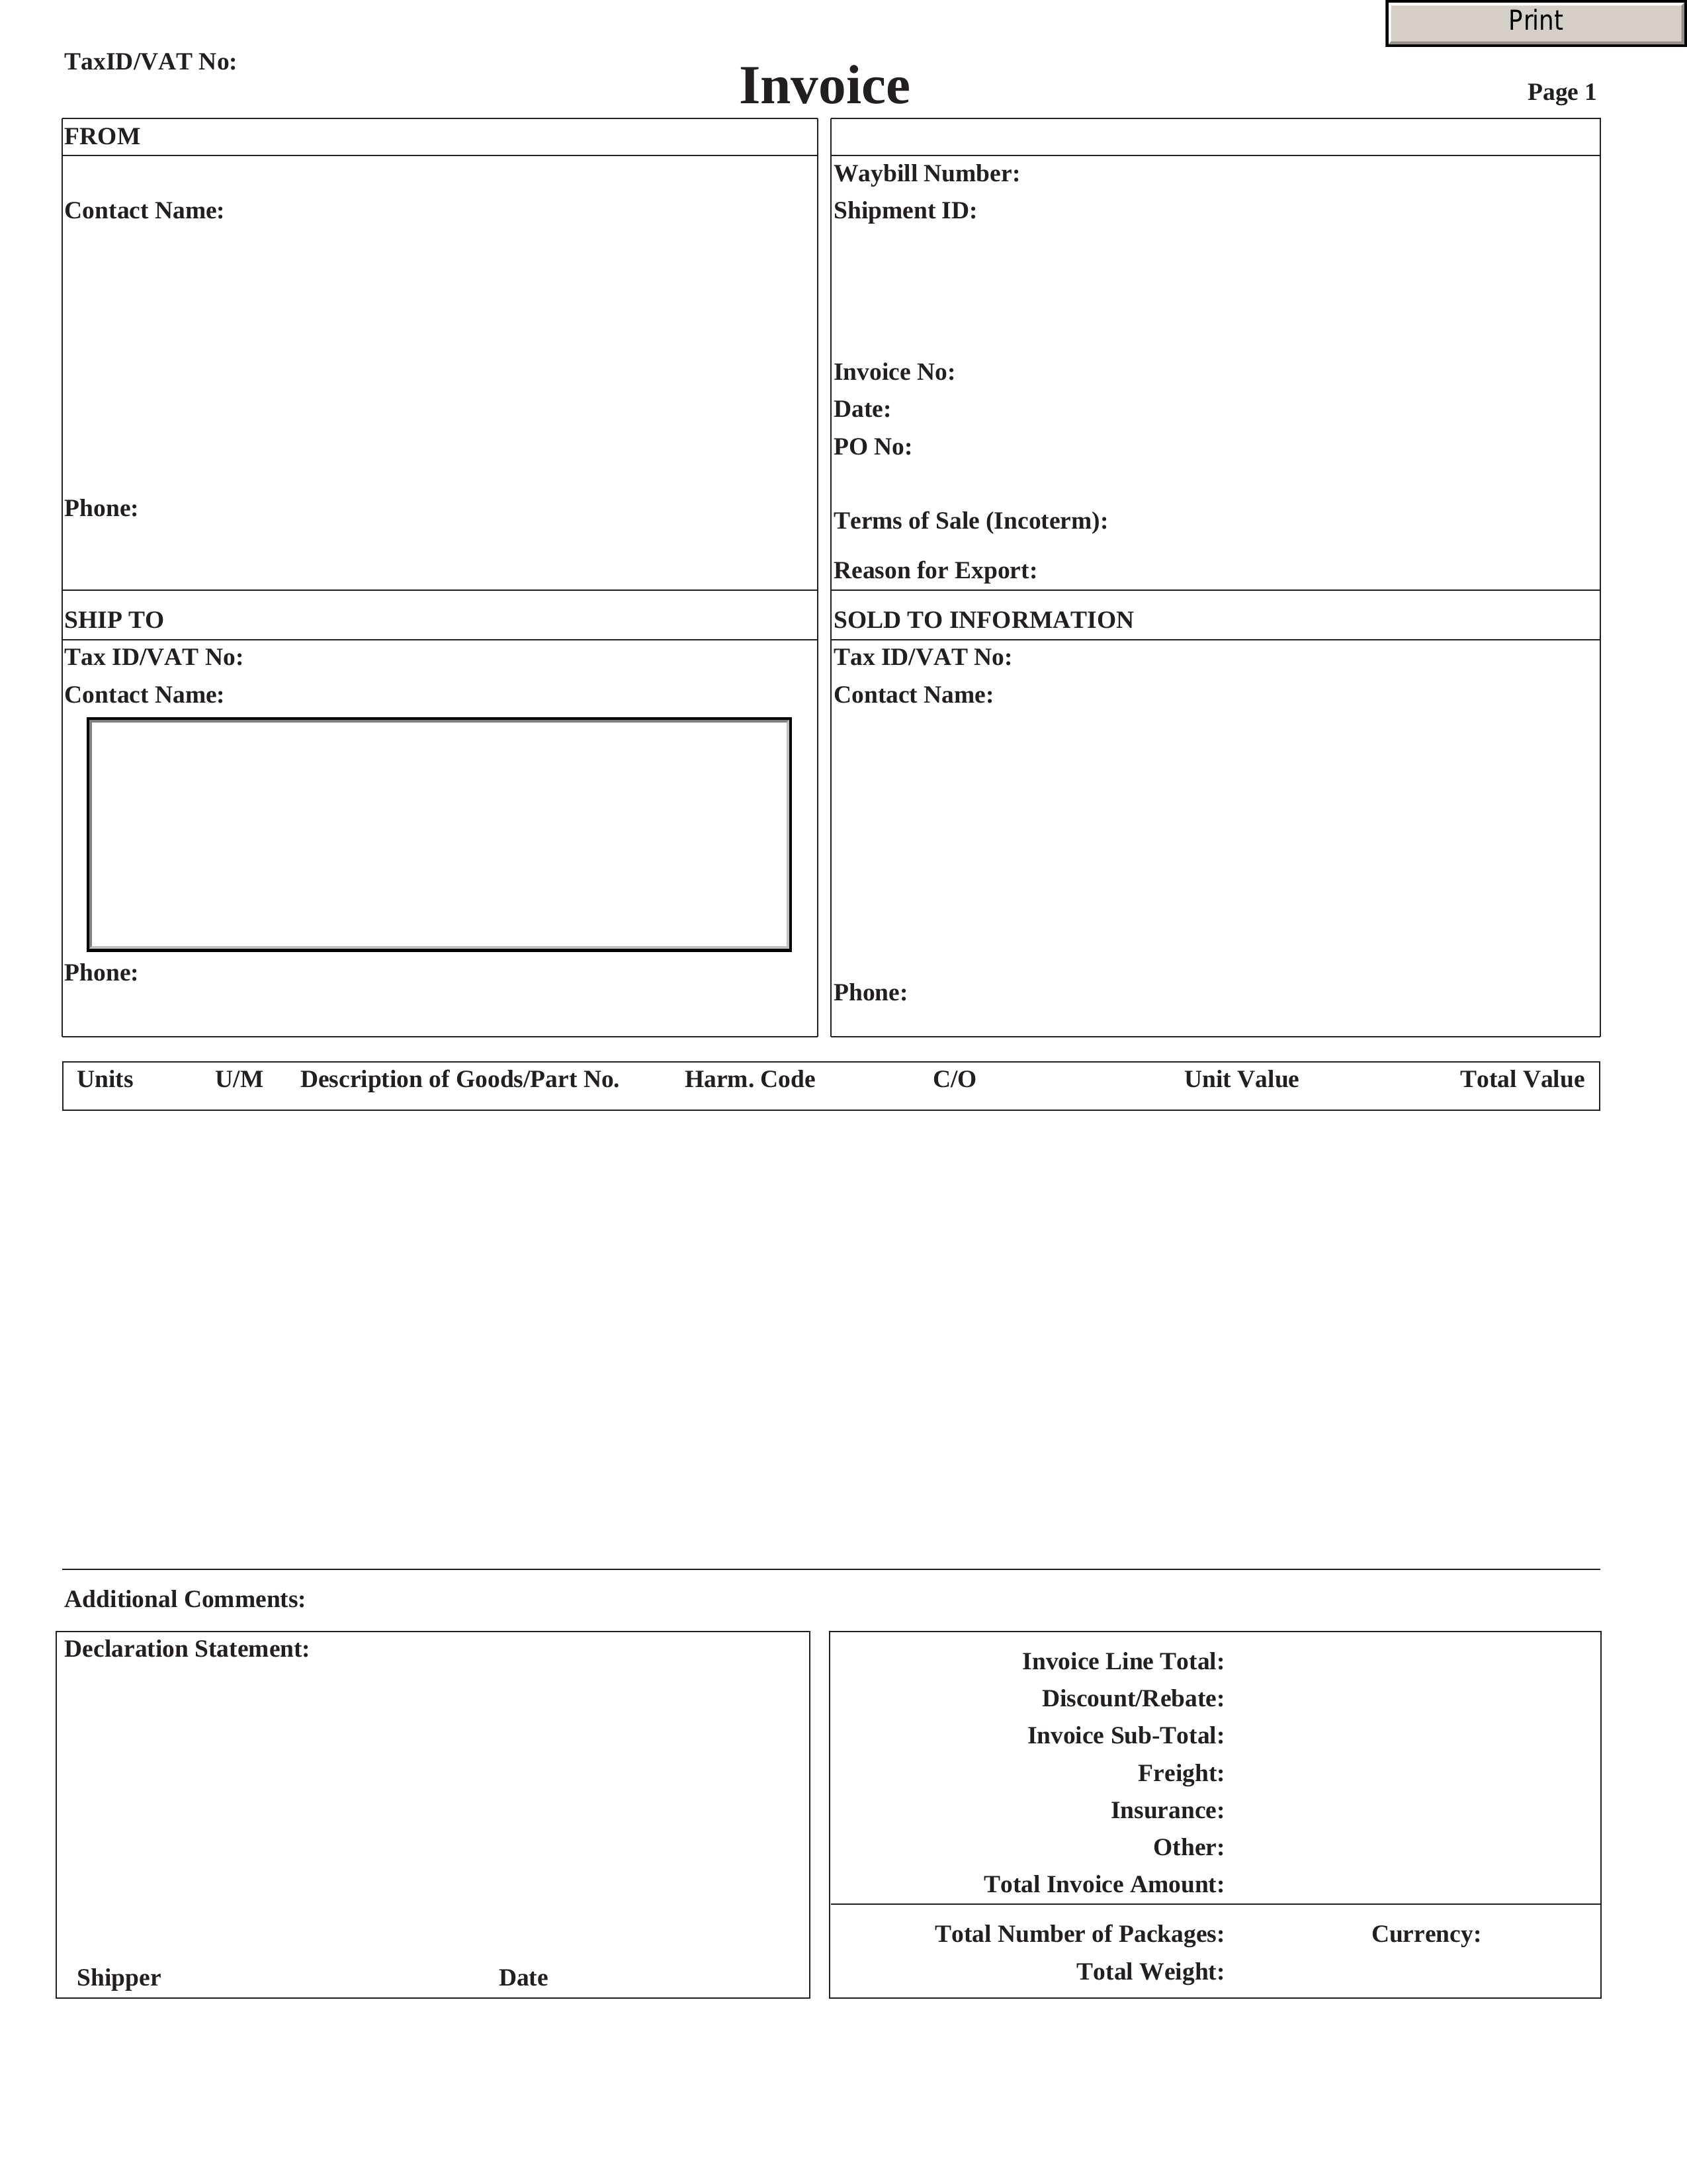 proforma for international shipping For International Shipping Invoice Template